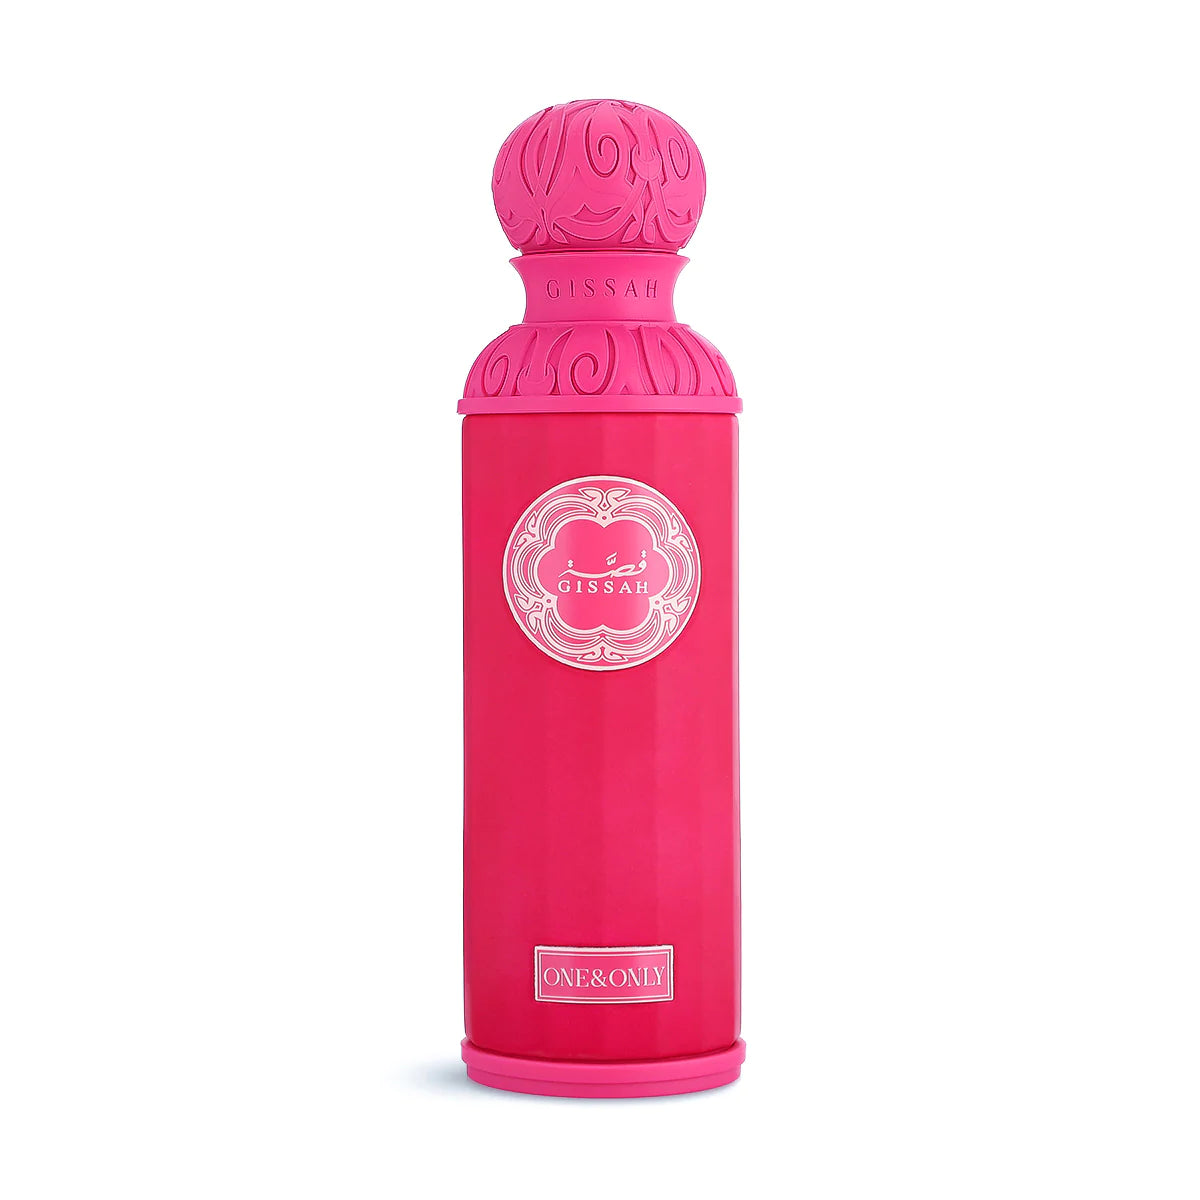 Gissah one & only - 200ml